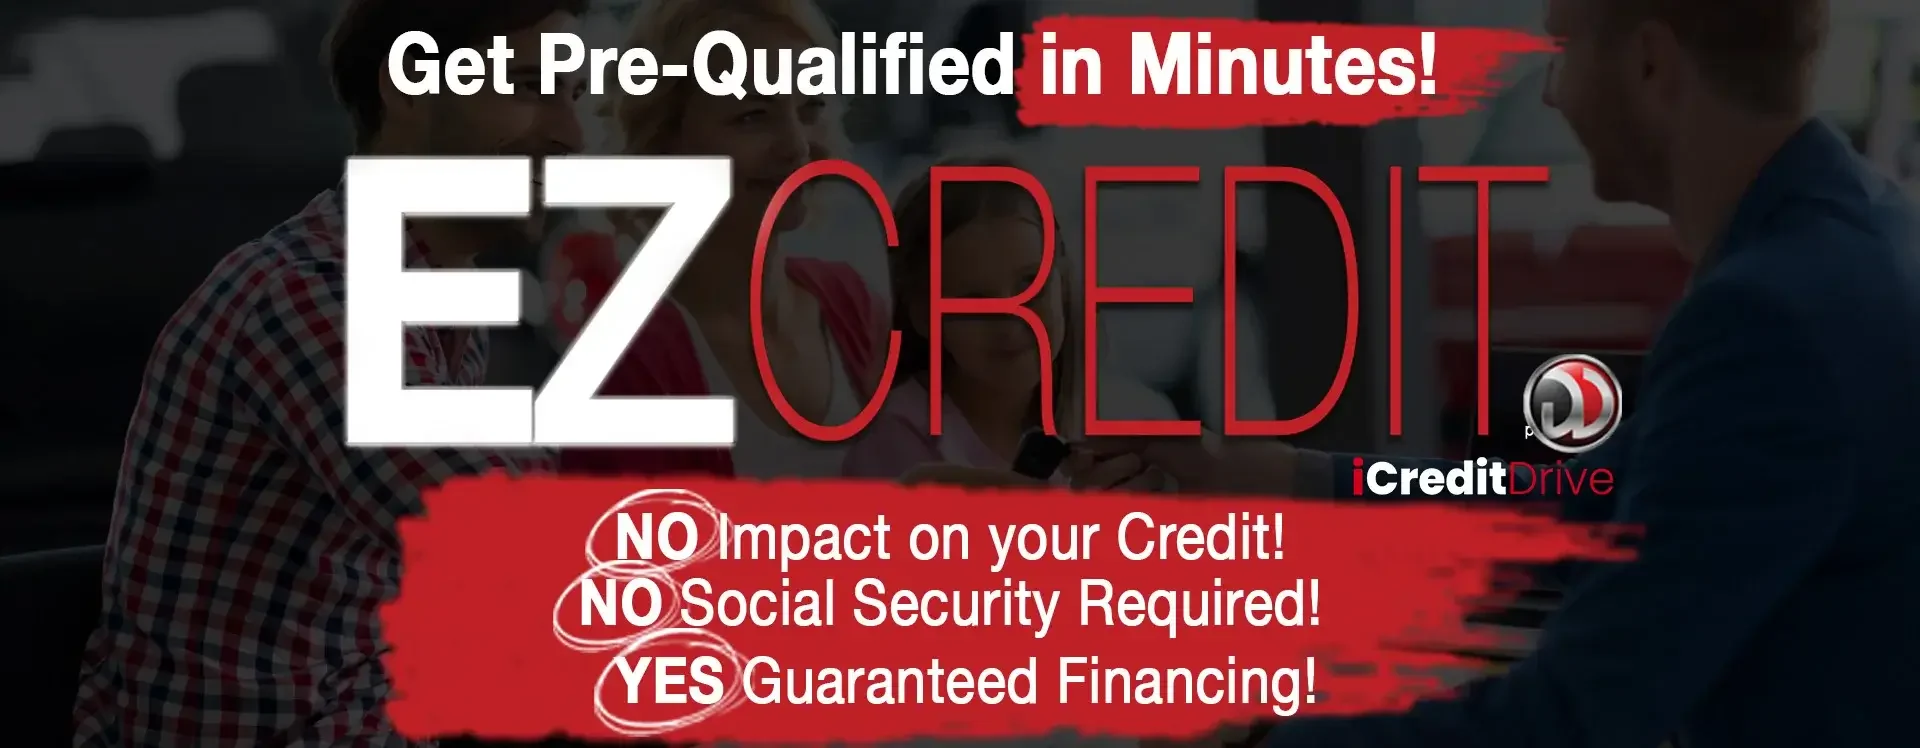 Get Pre-Qualified in Minutes!